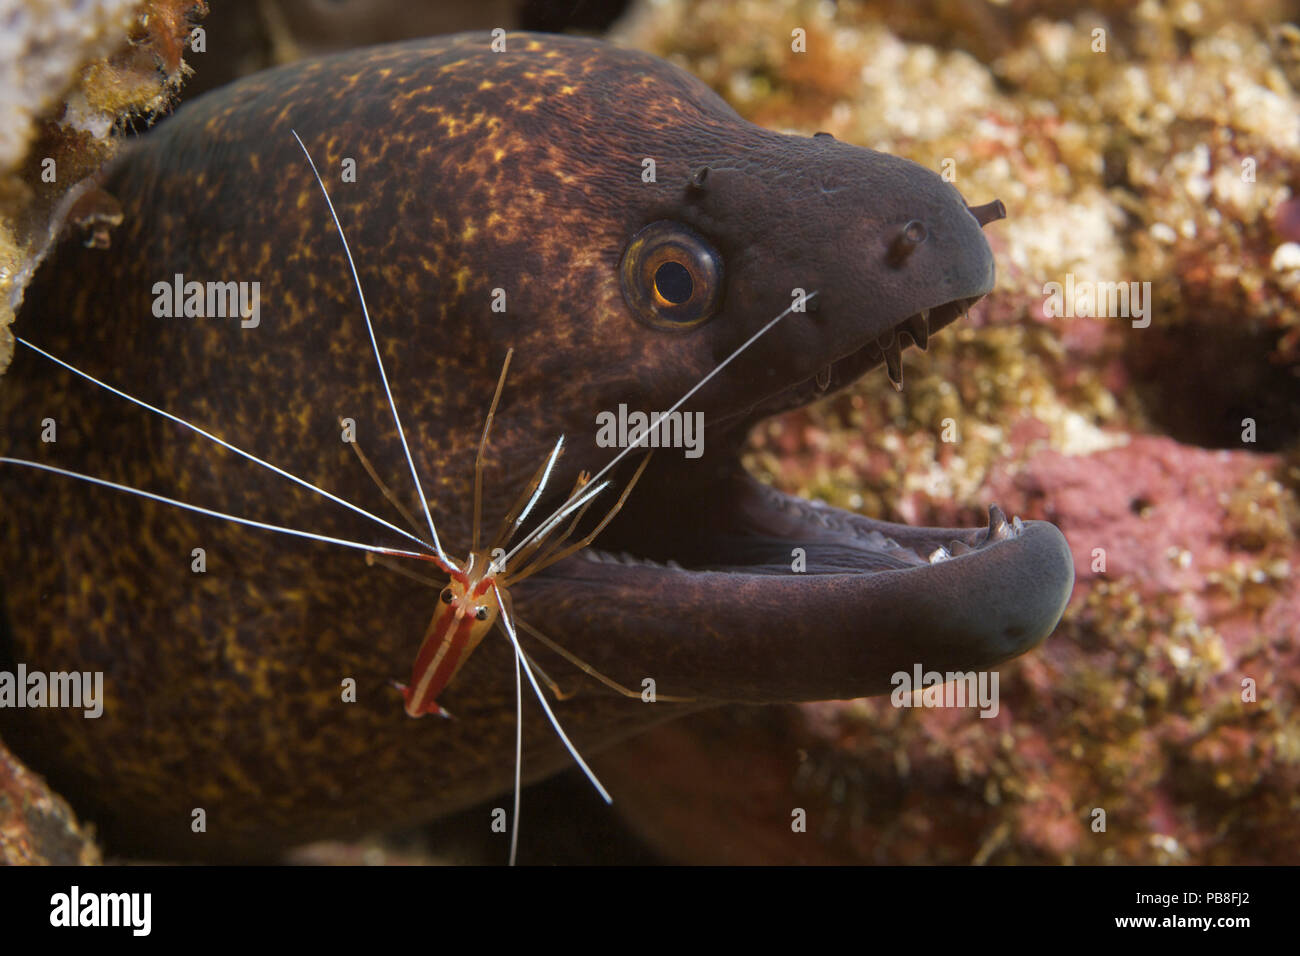 Giant moray eel (Gymnothorax javanicus) being cleaned by Scarlet cleaner shrimp (Lysmata amboinensis) Ambon, Indonesia Stock Photo